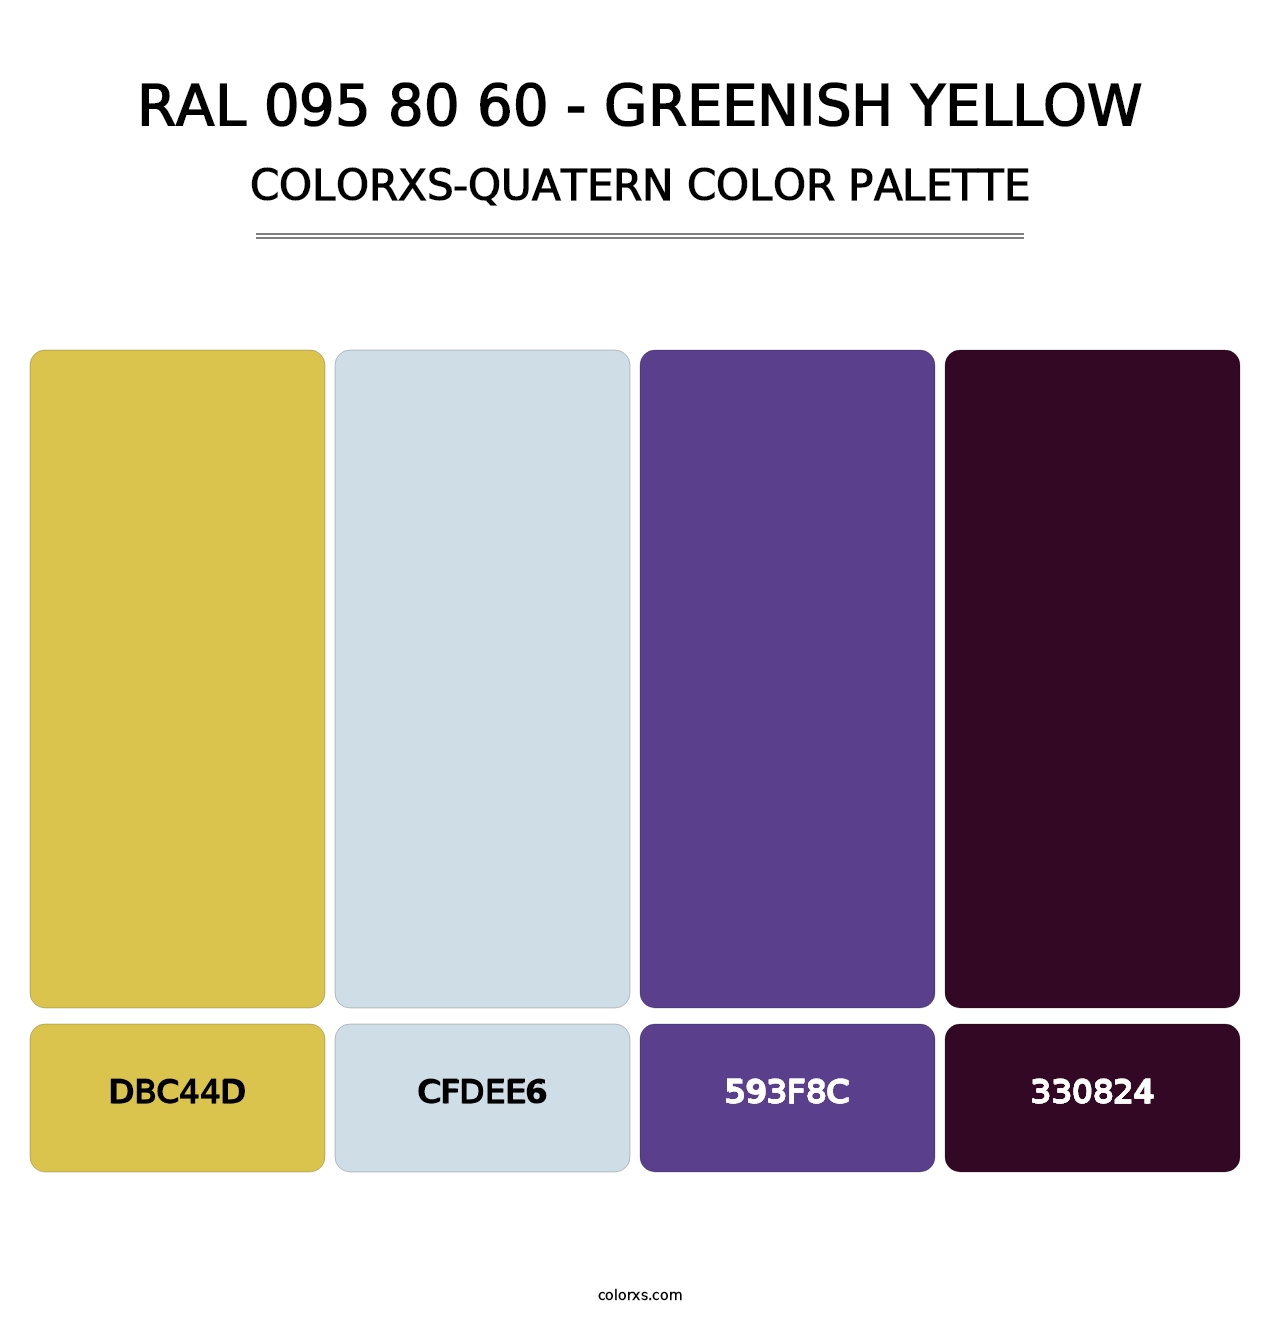 RAL 095 80 60 - Greenish Yellow - Colorxs Quatern Palette